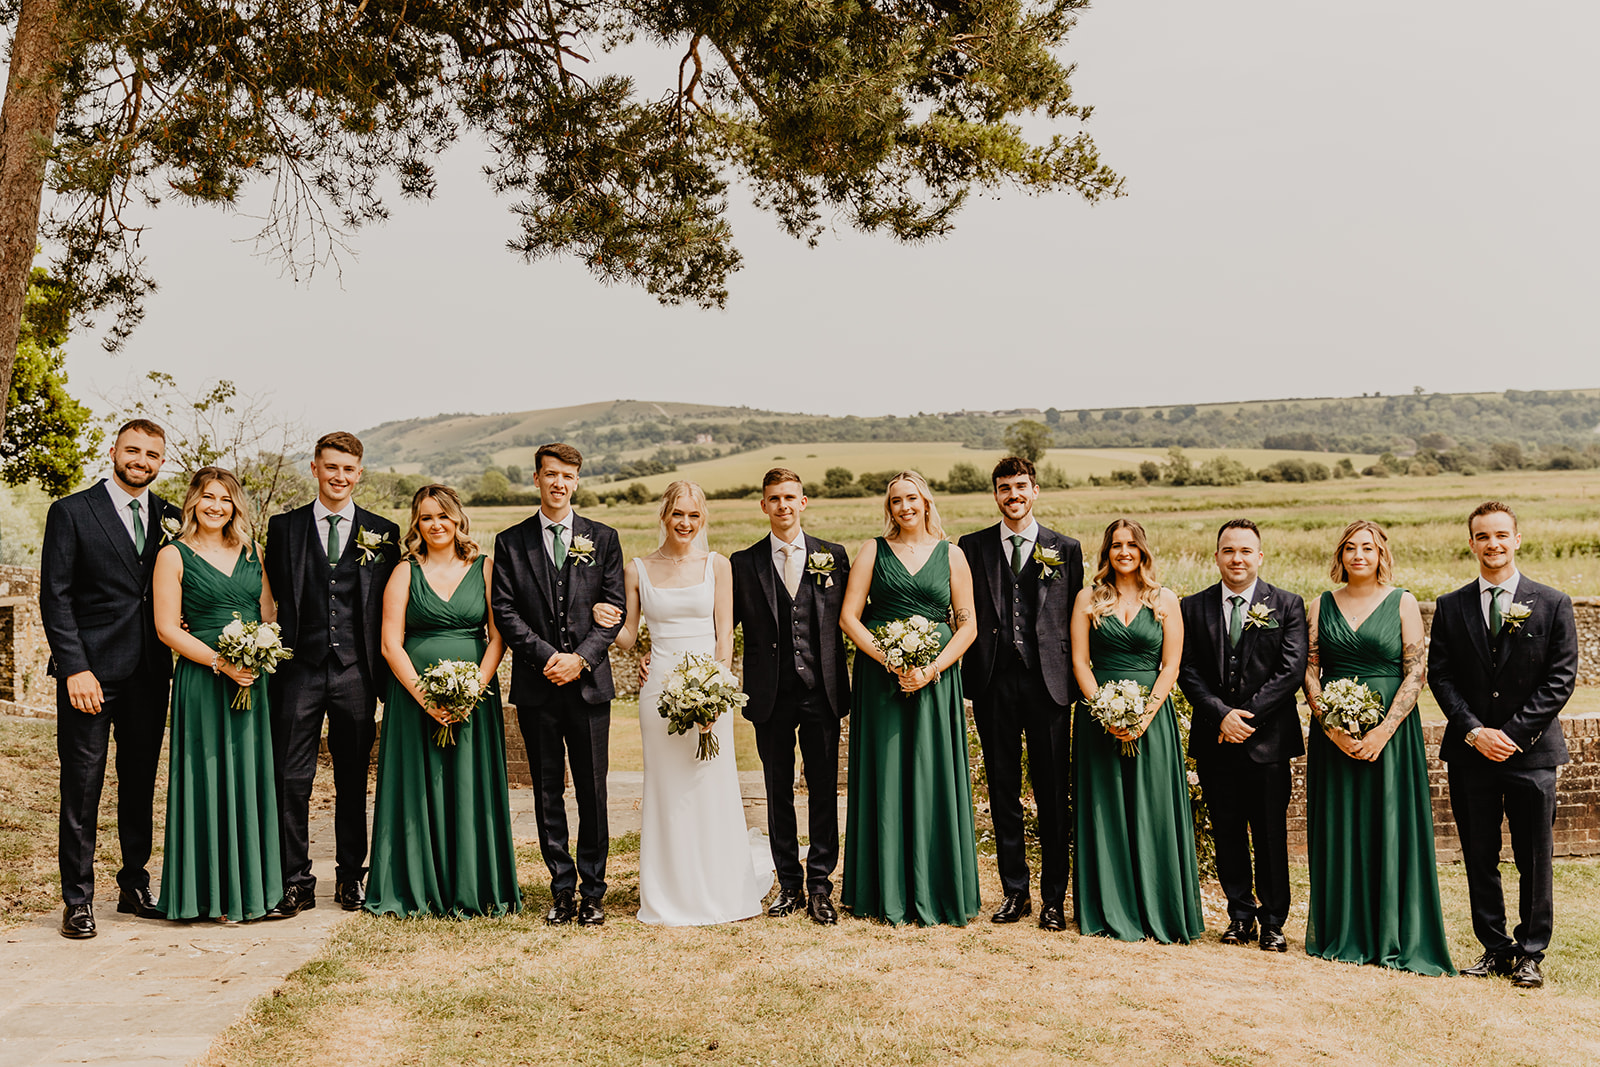 Wedding Party group photos at a Bury Manor Barn Wedding in Sussex. Photographer OliveJoy Photography.